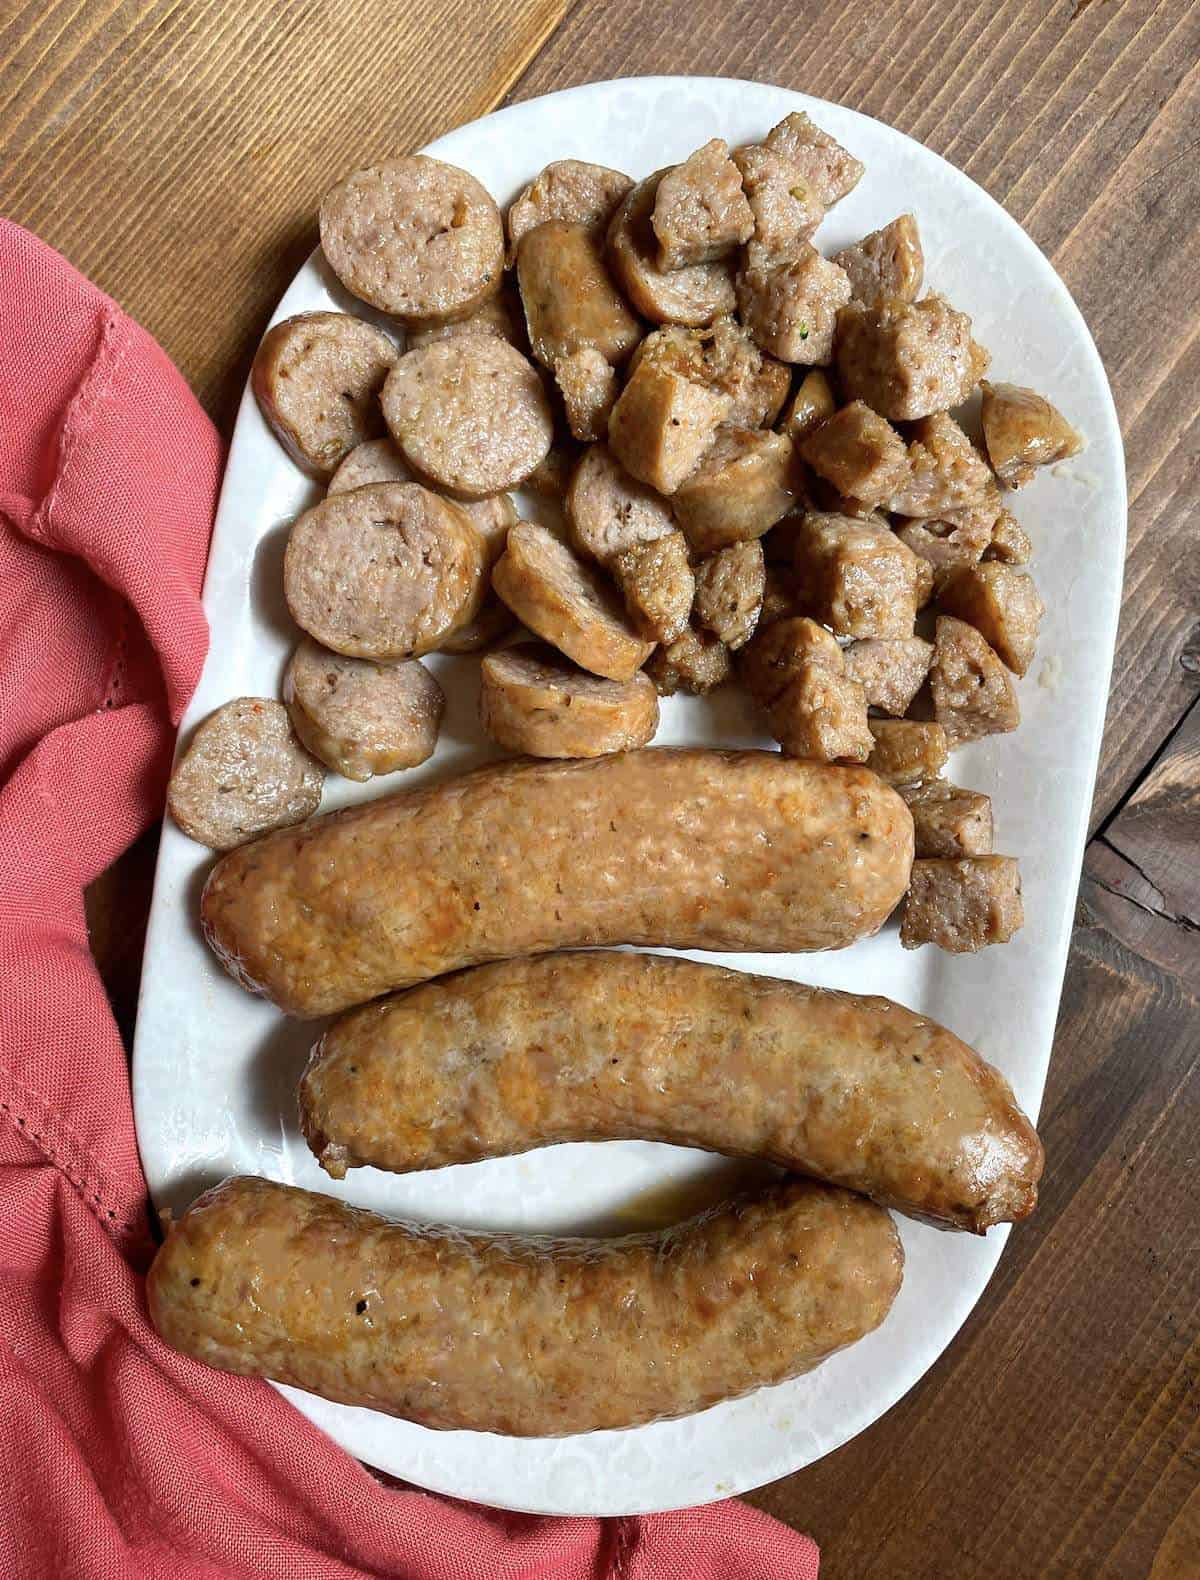 Air fried Italian sausages cut in different ways on a white plate with a pink napkin.